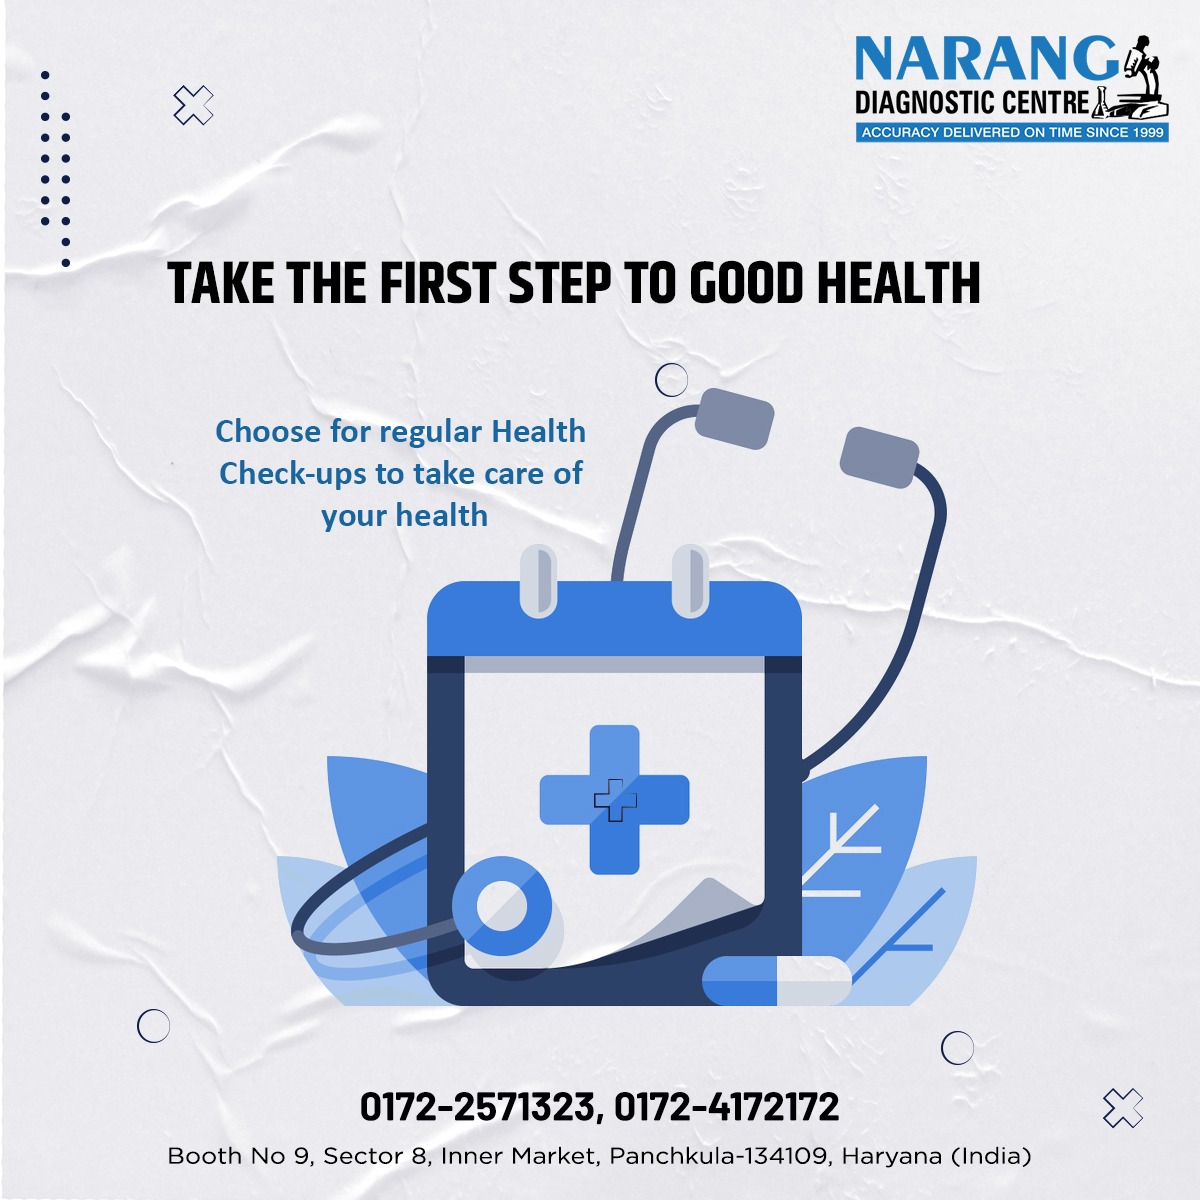 Take the First step to Good Health 

 Choose for regular 𝐇𝐞𝐚𝐥𝐭𝐡 𝐂𝐡𝐞𝐜𝐤-𝐮𝐩𝐬 to take care of your health

Book your Health Check-up - 0172-2571323 or 0172-4172172

#Healthcheckups #Healthpackage #Diagnosticcentre #Trusteddiagnosticcentre #Wholebodycheckup